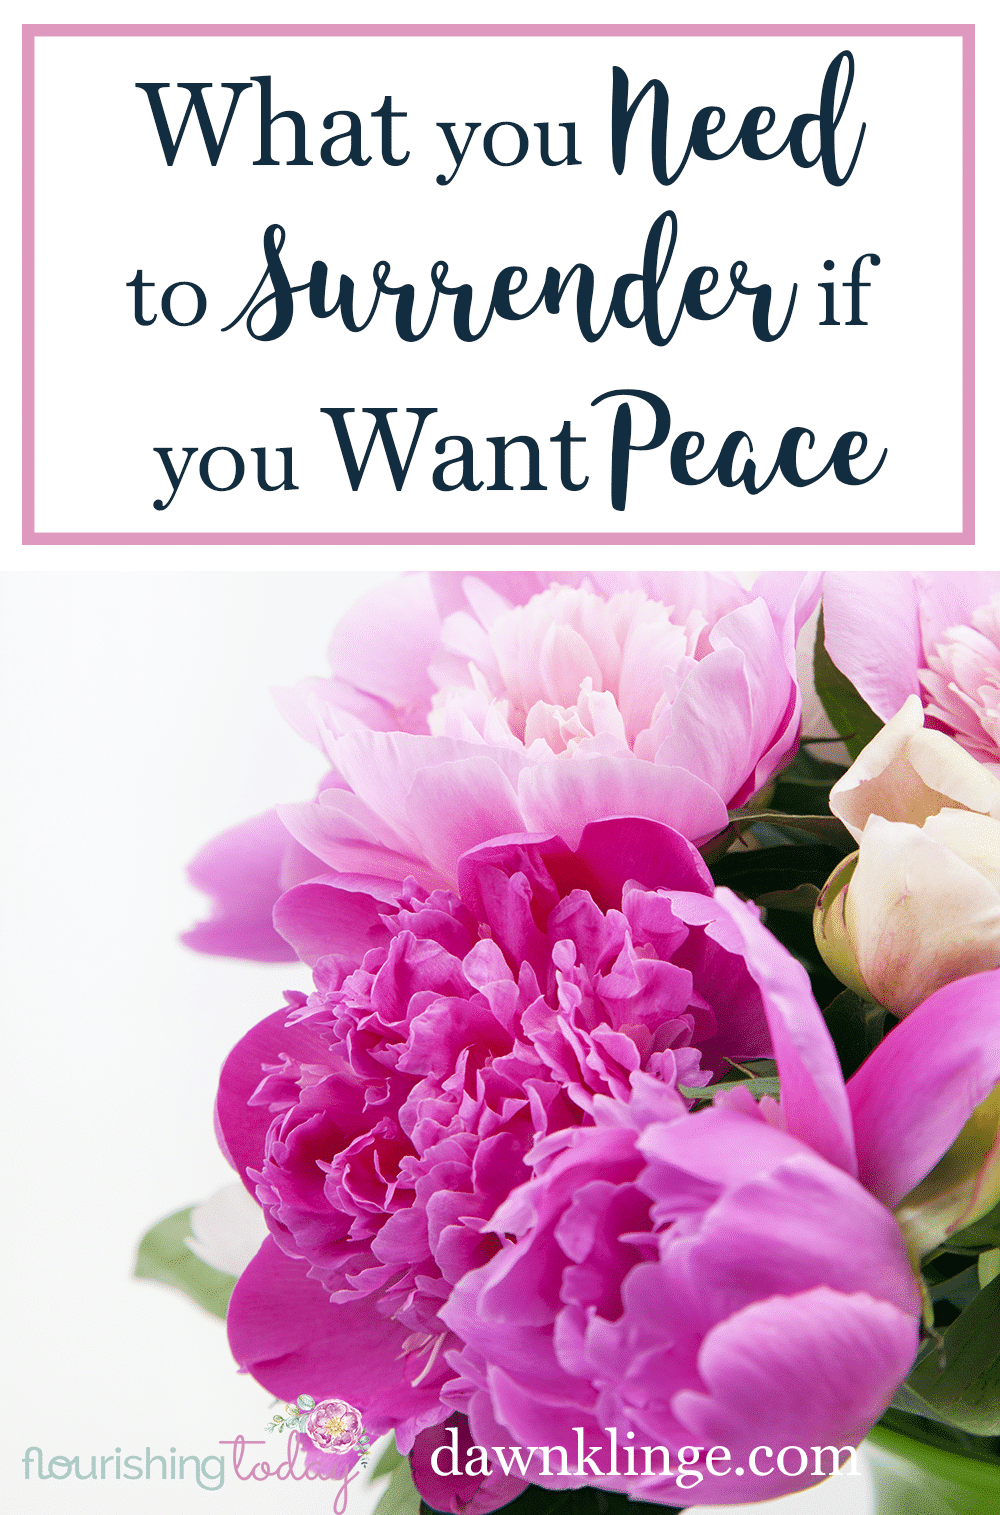 Do you find it hard to to surrender to god completely? We all have things that we can hold onto. But perfect peace comes with complete surrender.